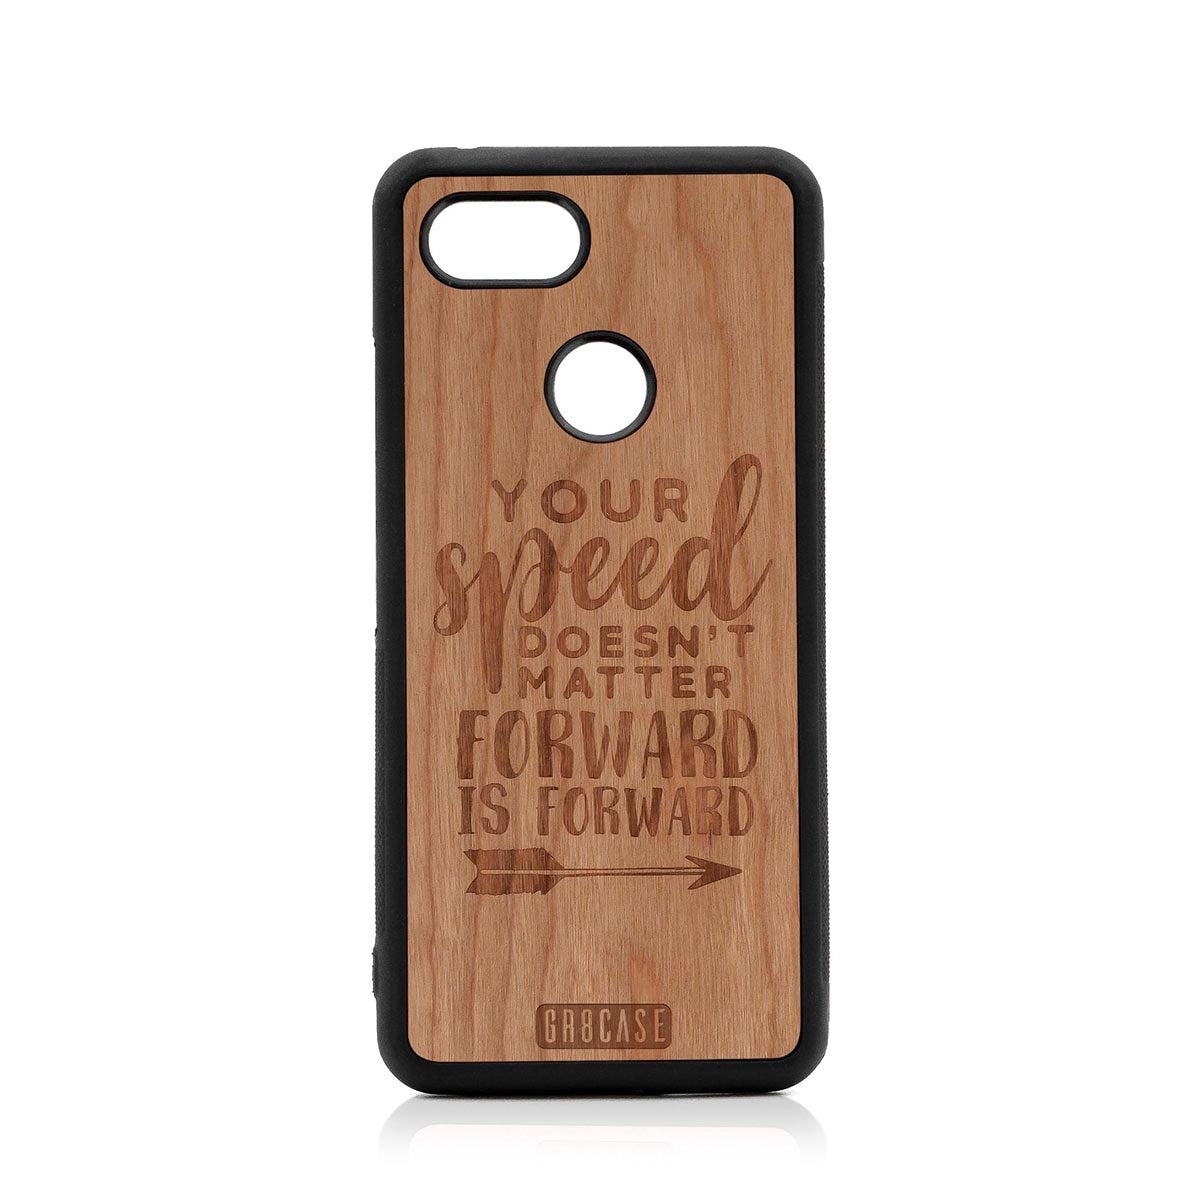 Your Speed Doesn't Matter Forward Is Forward Design Wood Case Google Pixel 3